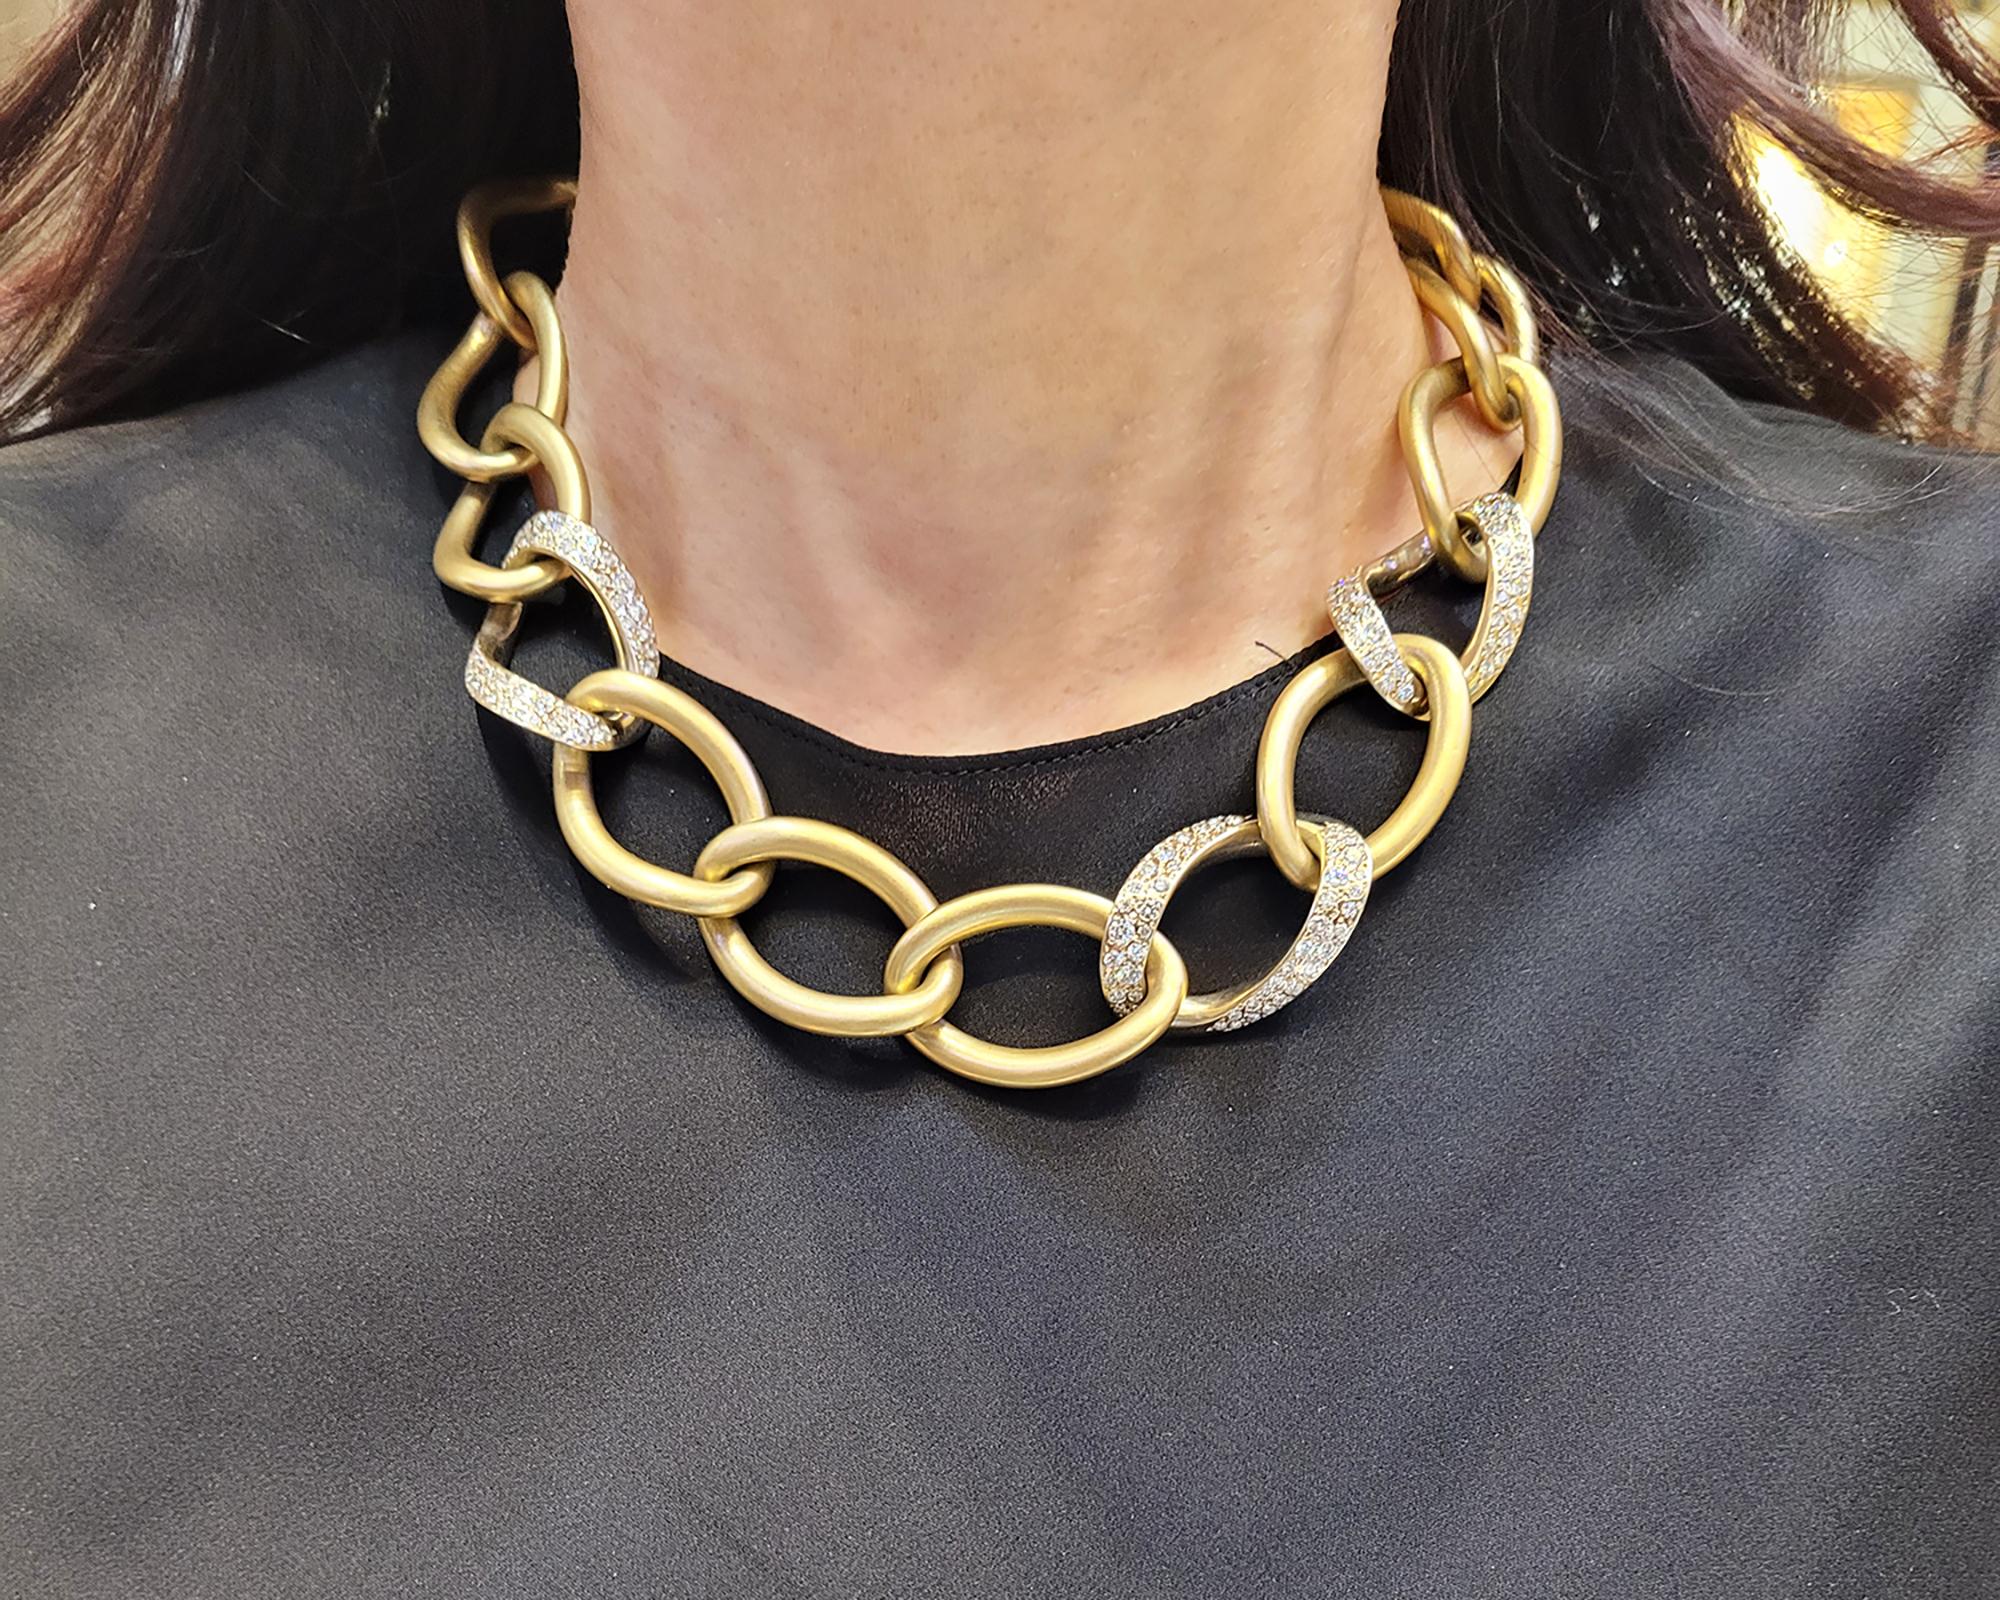 An elegant necklace designed as links and decorated with diamonds.
Created by Pomellato in Italy. 
Made in 18K yellow-green gold with matte finish. Weight of gold is 160 grams.
Three links are embellished with diamonds weighing 4.26 carats. 
The